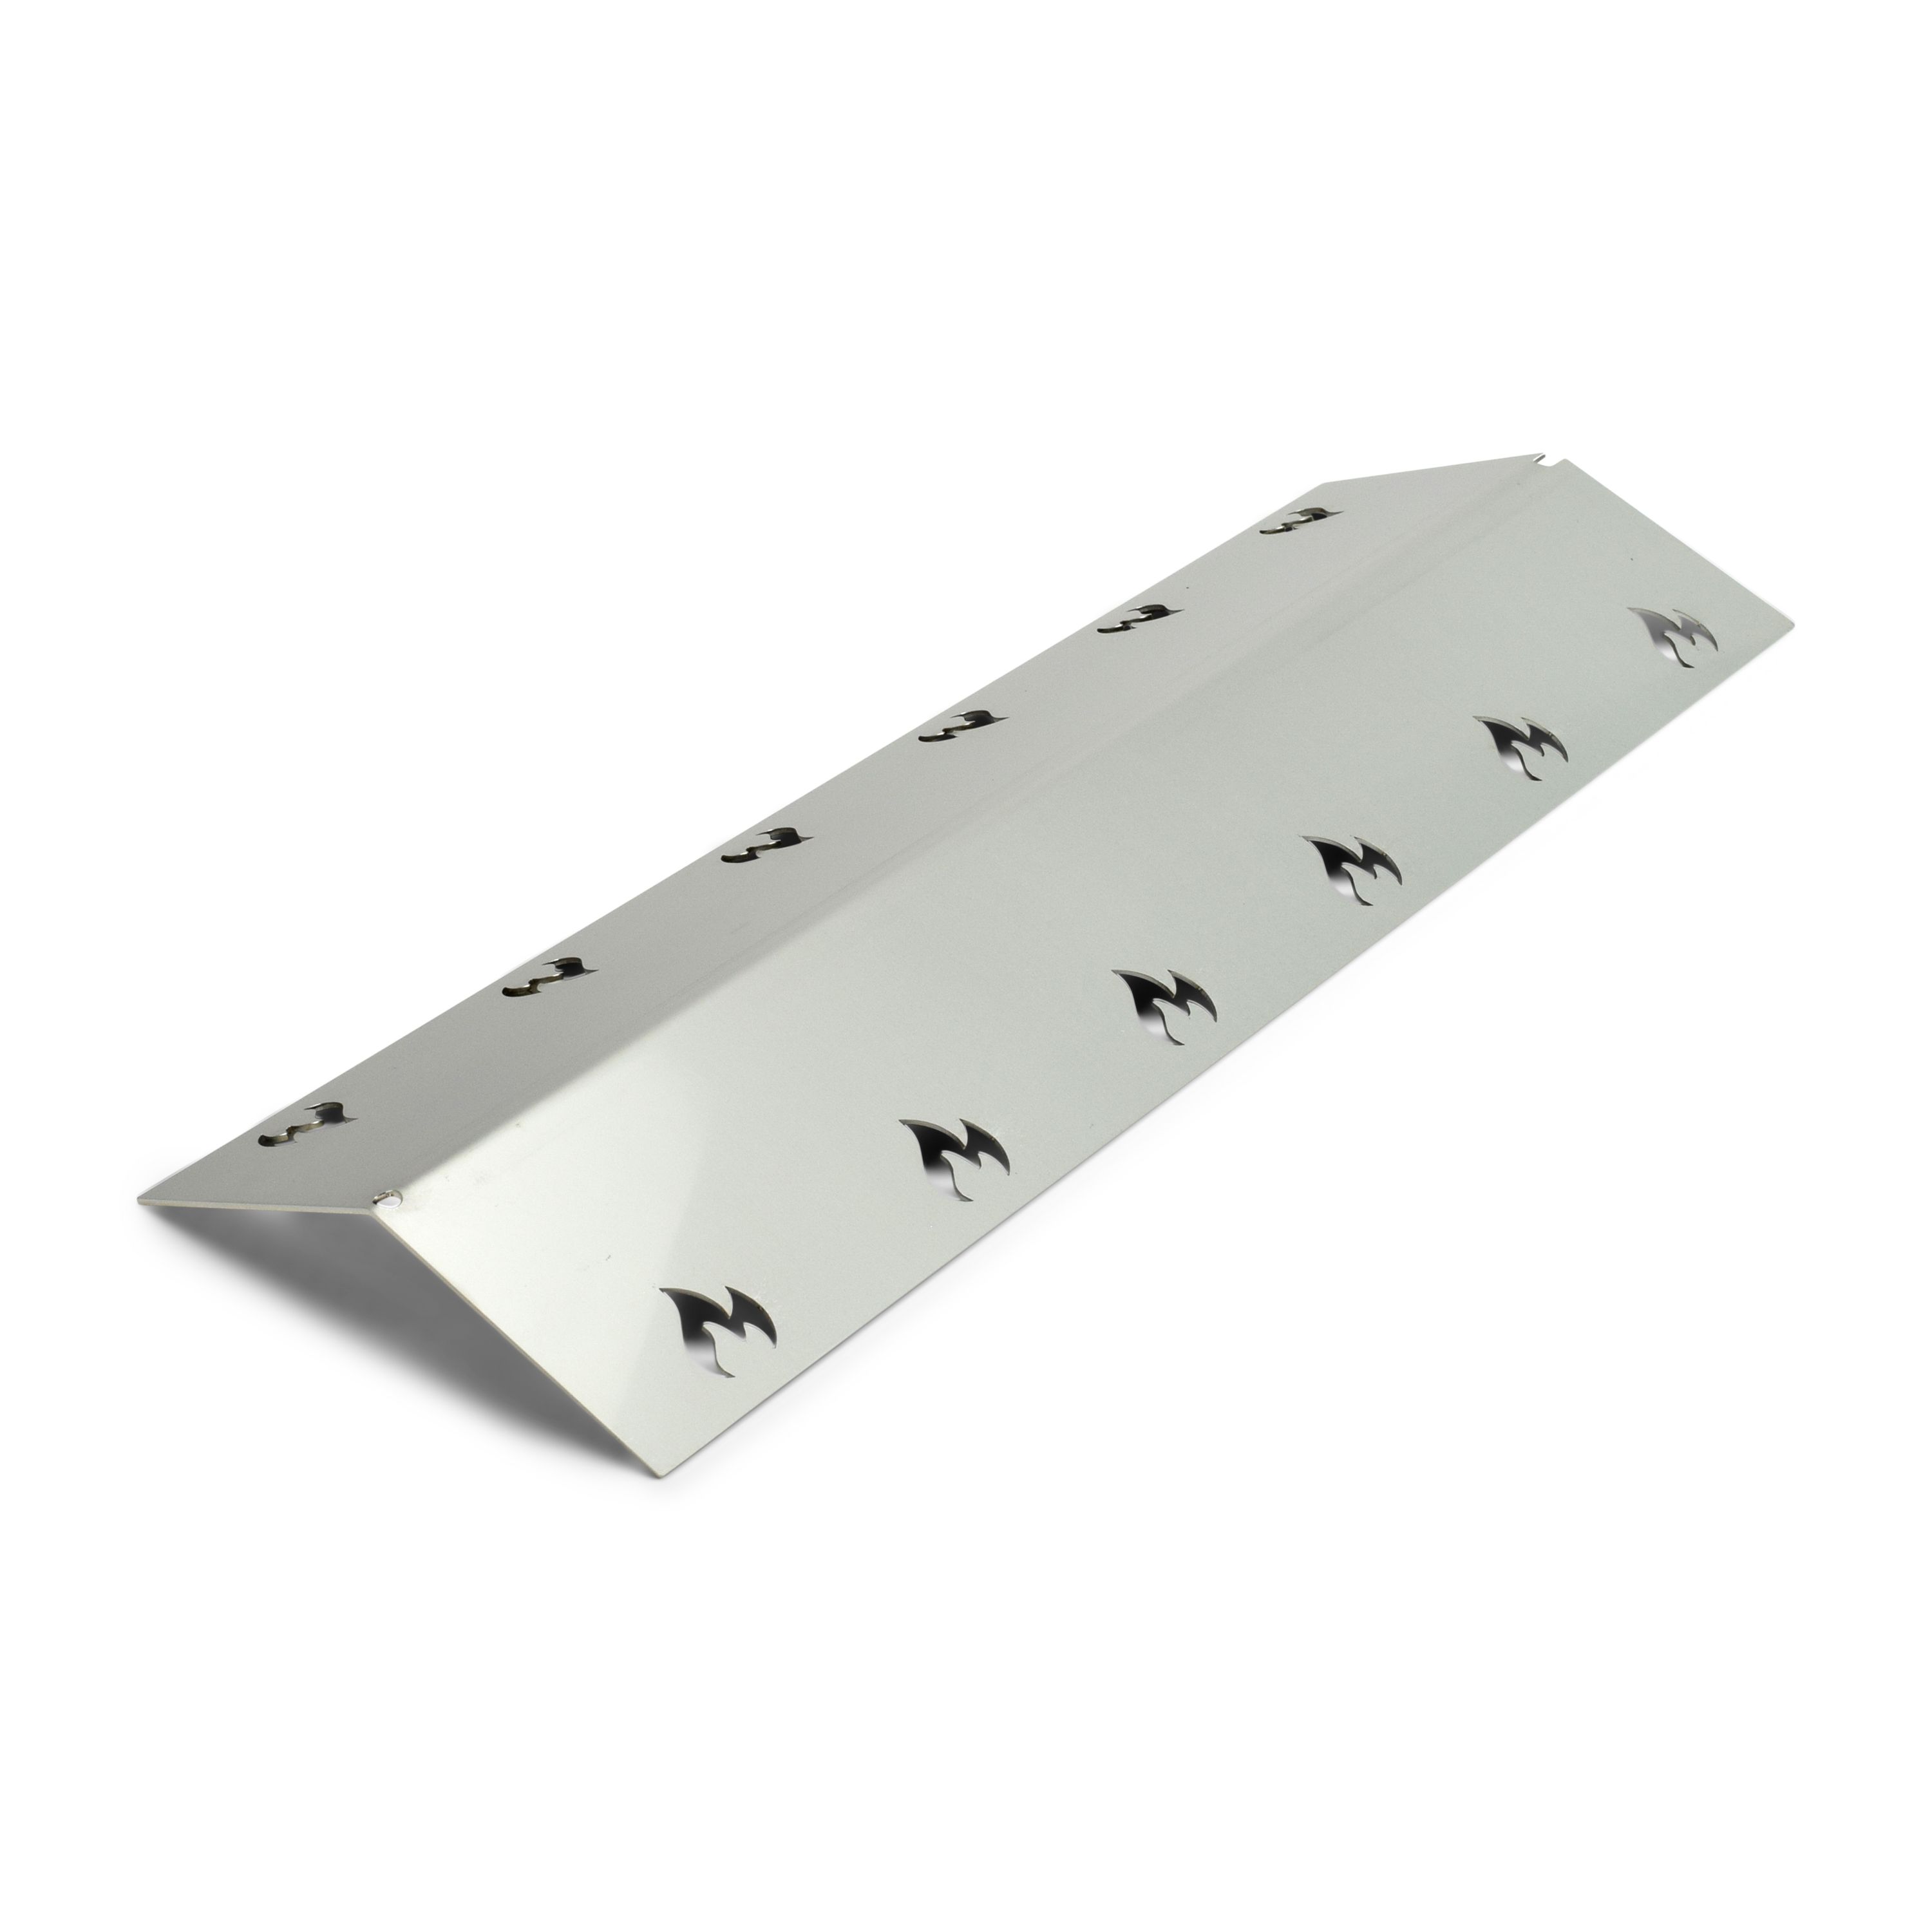 Stainless steel burner cover 43.5 x 15 cm Replacement aroma rail outlives your barbecue